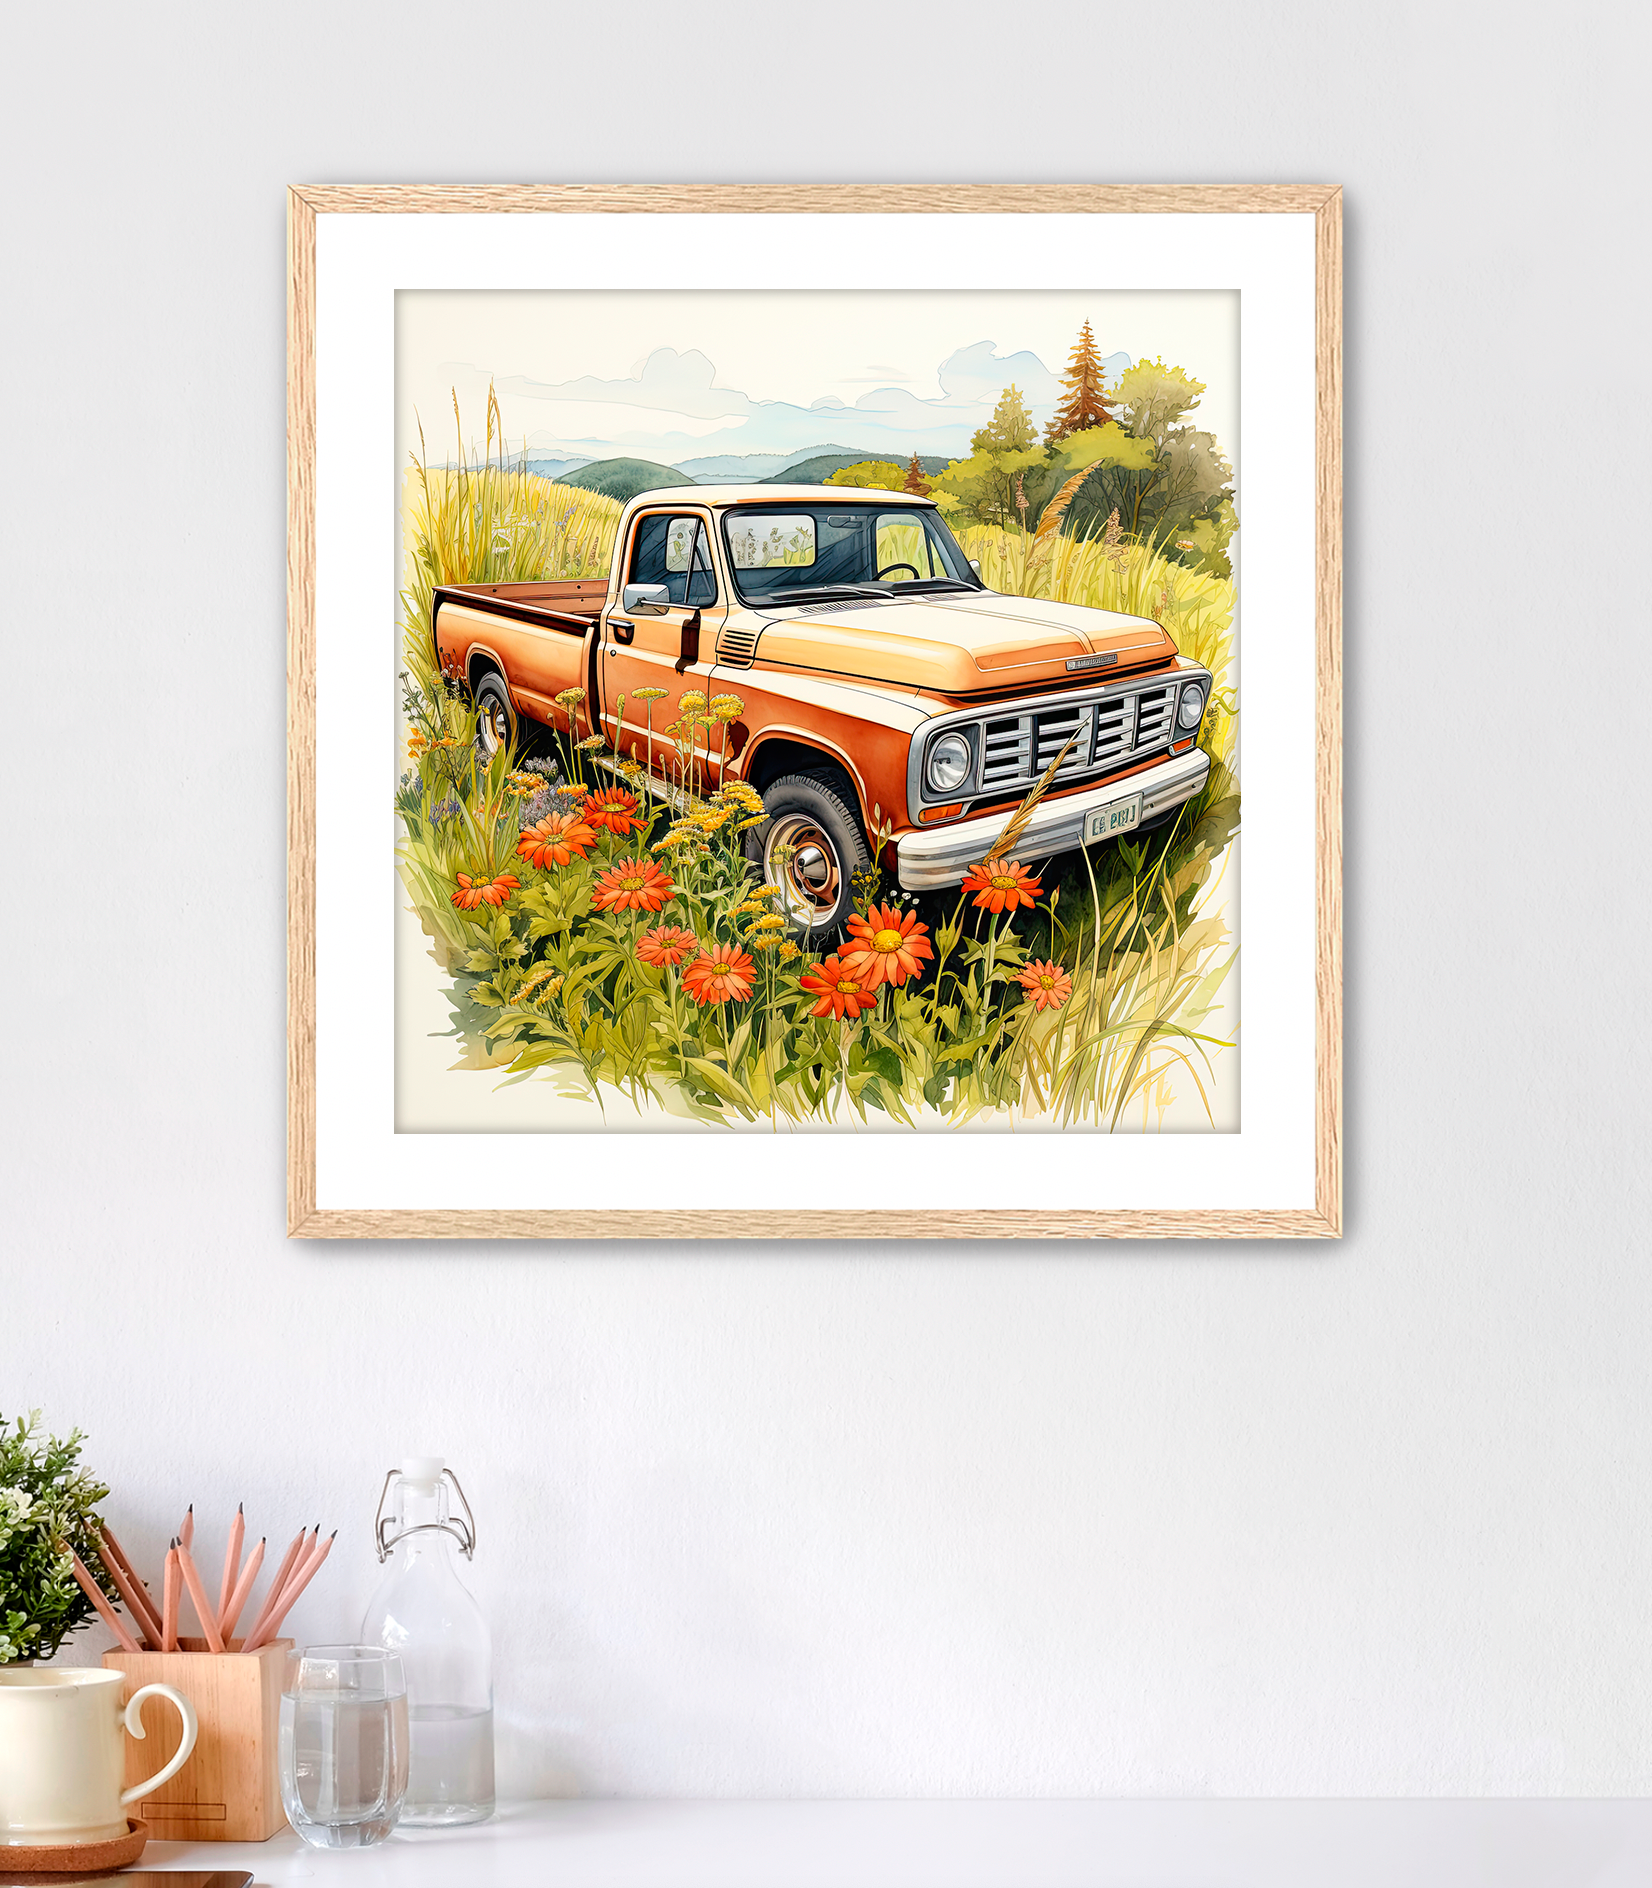 Rustic burnt orange pickup truck in a country field of flowers art, framed with white mat and oak frame. Country art for sale.customconcepts.art